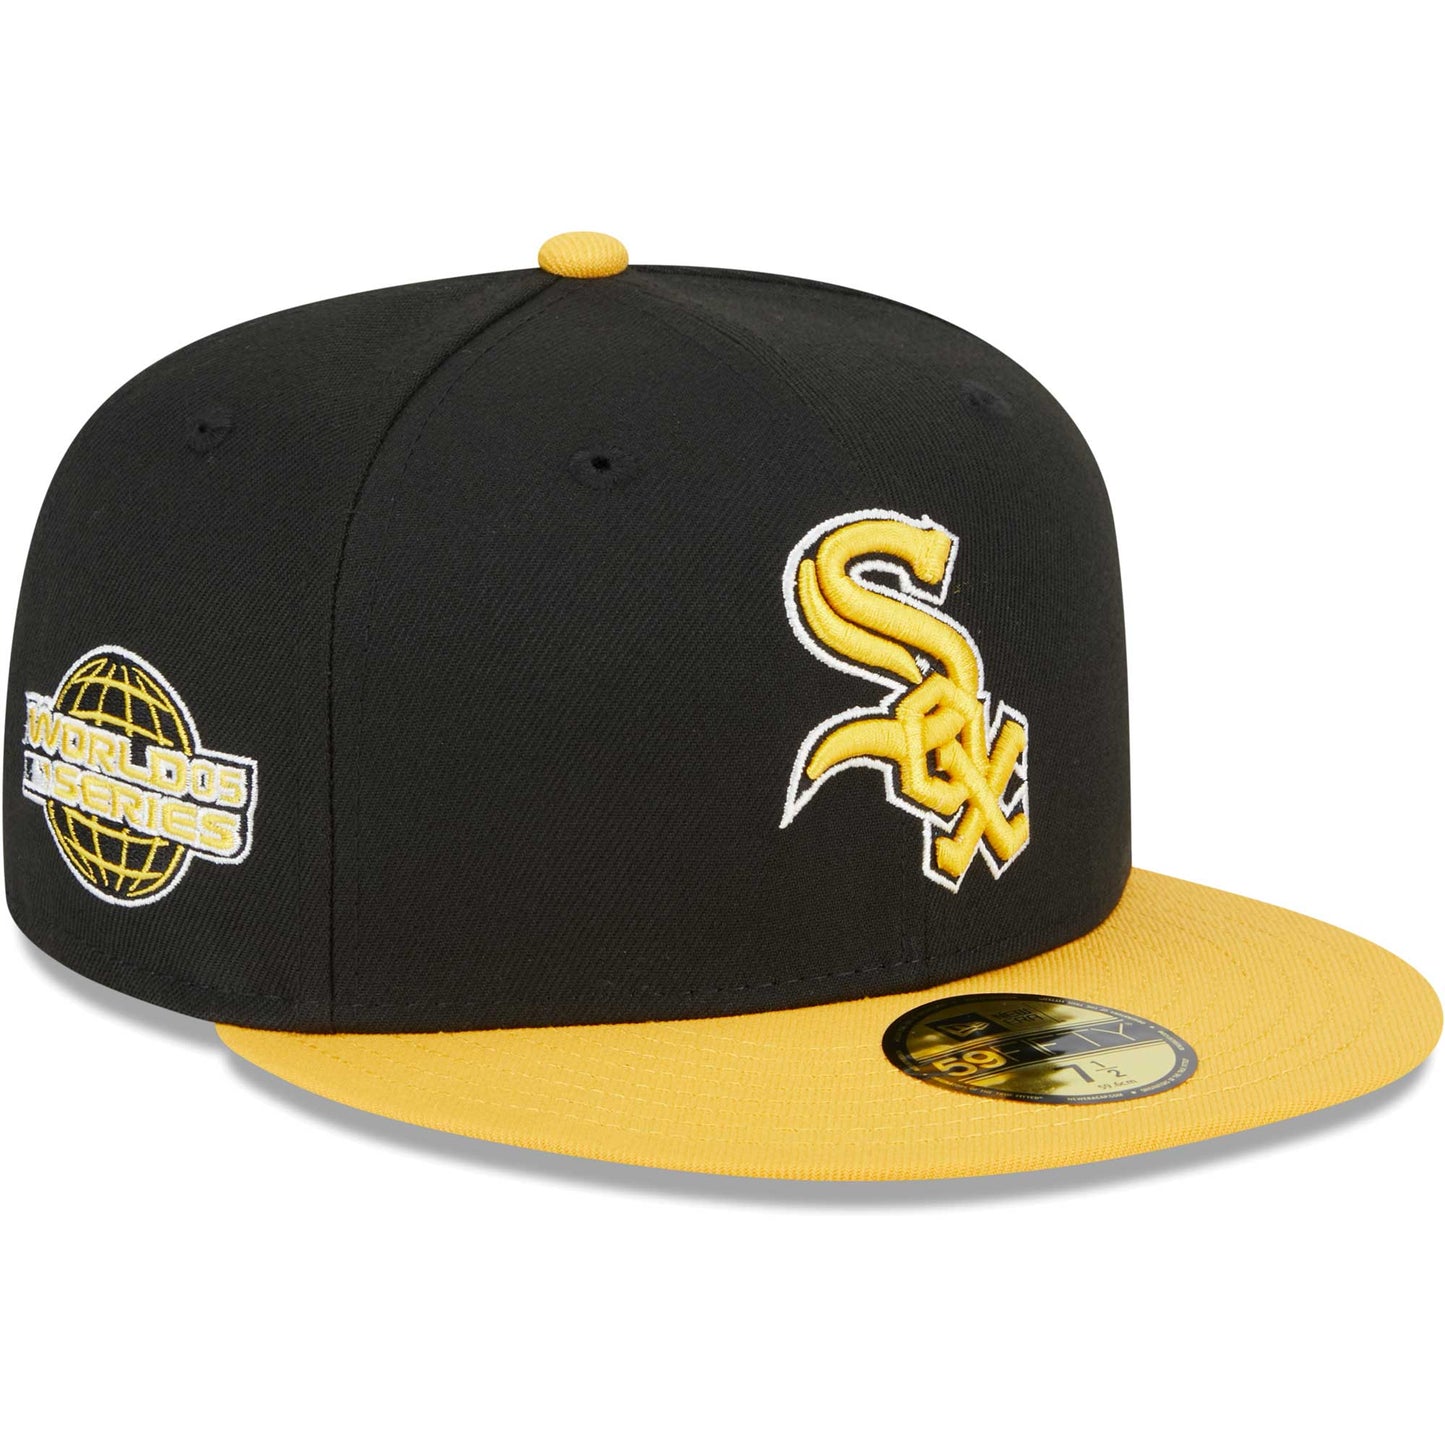 Chicago White Sox New Era 59FIFTY Fitted Hat - Black/Gold